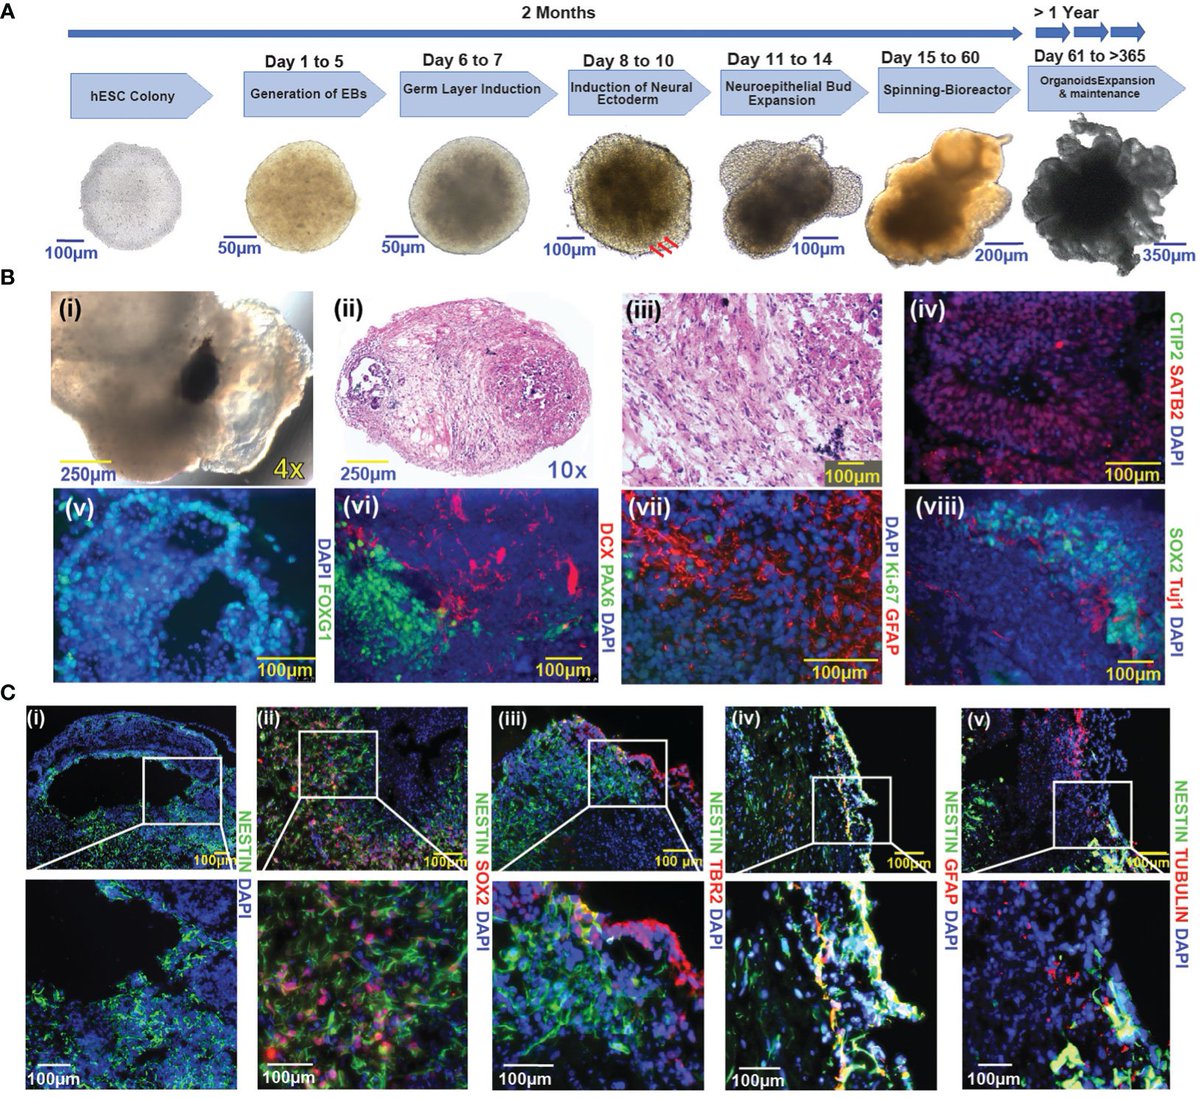 Check out the latest manuscript from @pascalzinn Lab in which we demonstrate how TP53-PTEN-NF1 depletion in human brain organoids produces a glioma phenotype. @rrcolen @NdukaAmankulor @Baoli_Hu @HameedFarrukh @PittNeurosurg frontiersin.org/journals/oncol…